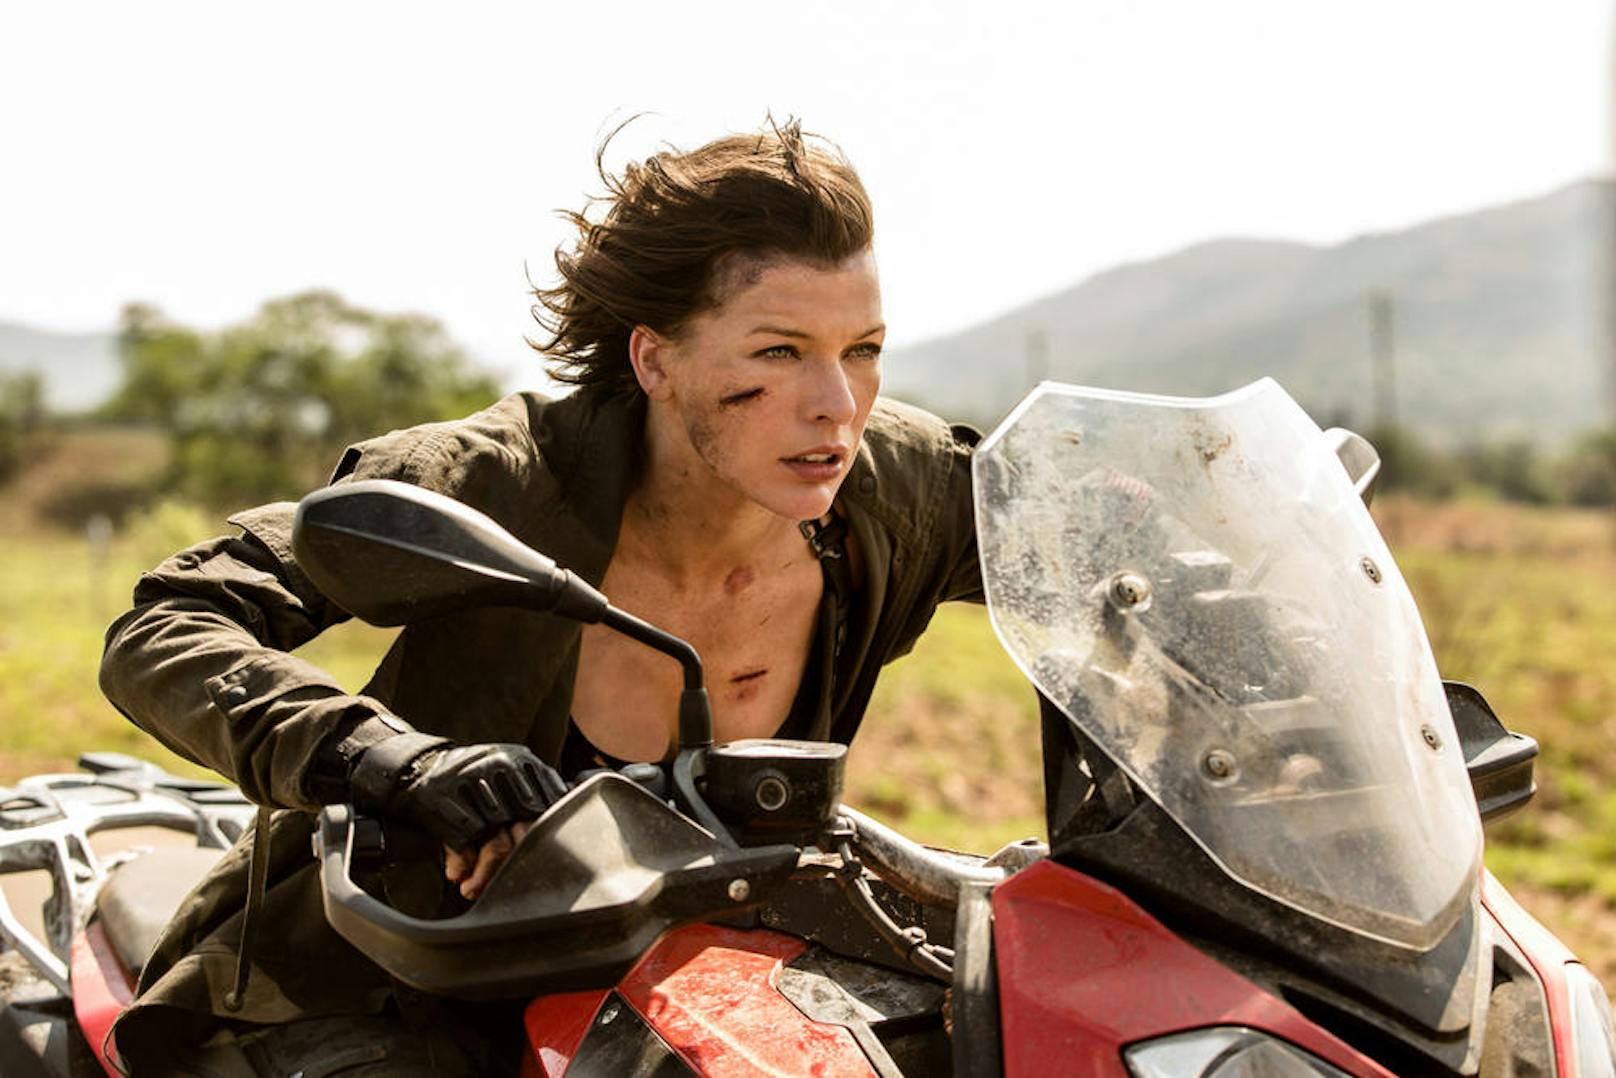 Milla Jovovich in "Resident Evil - The Final Chapter"